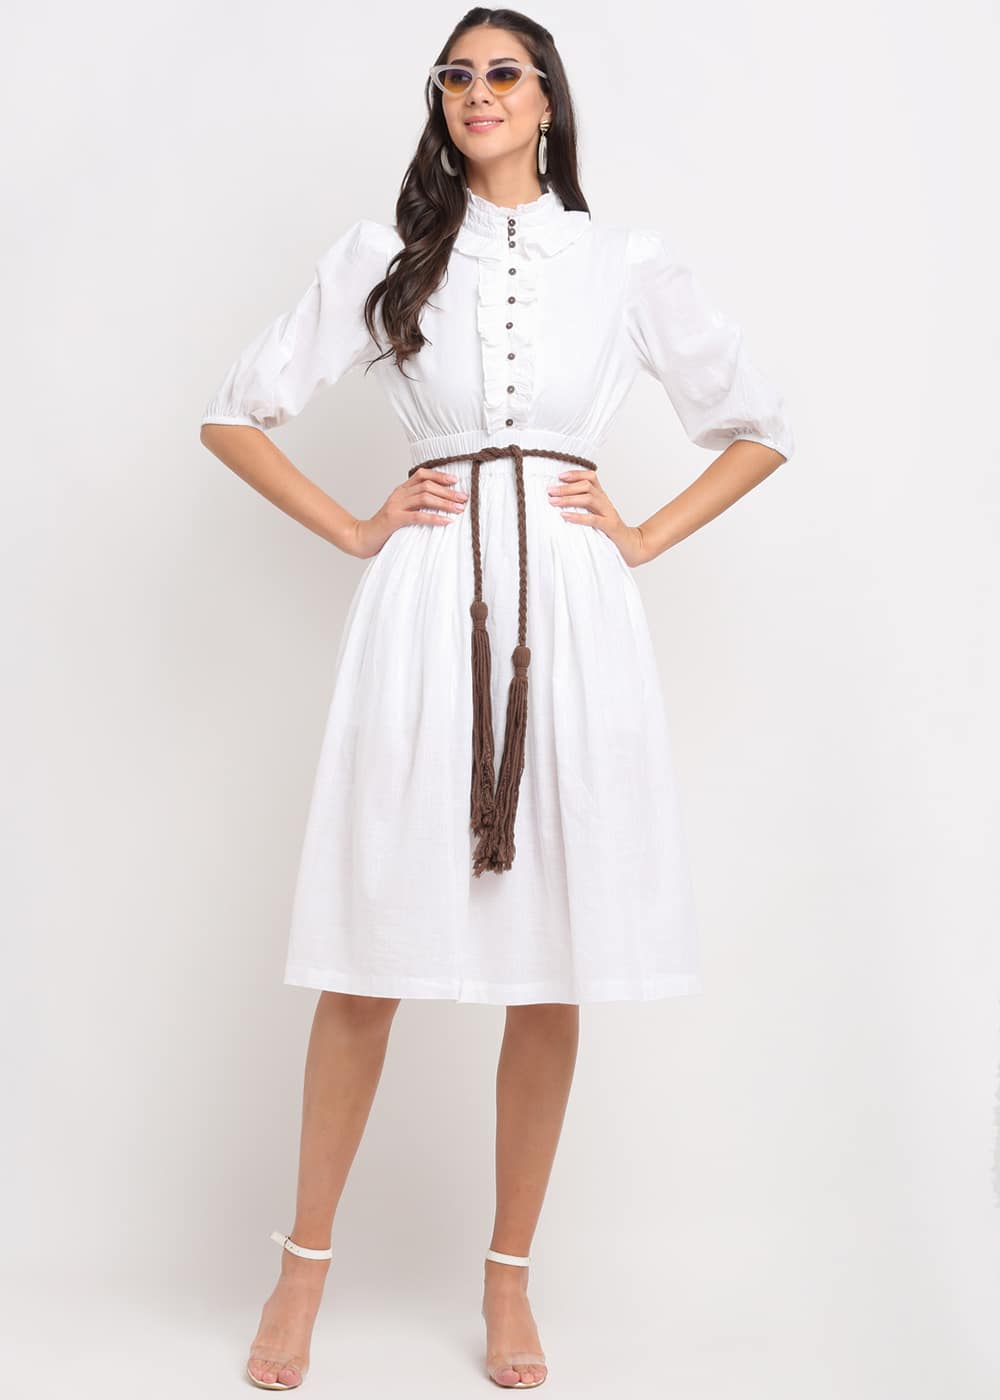 White Dress With Brown Belt